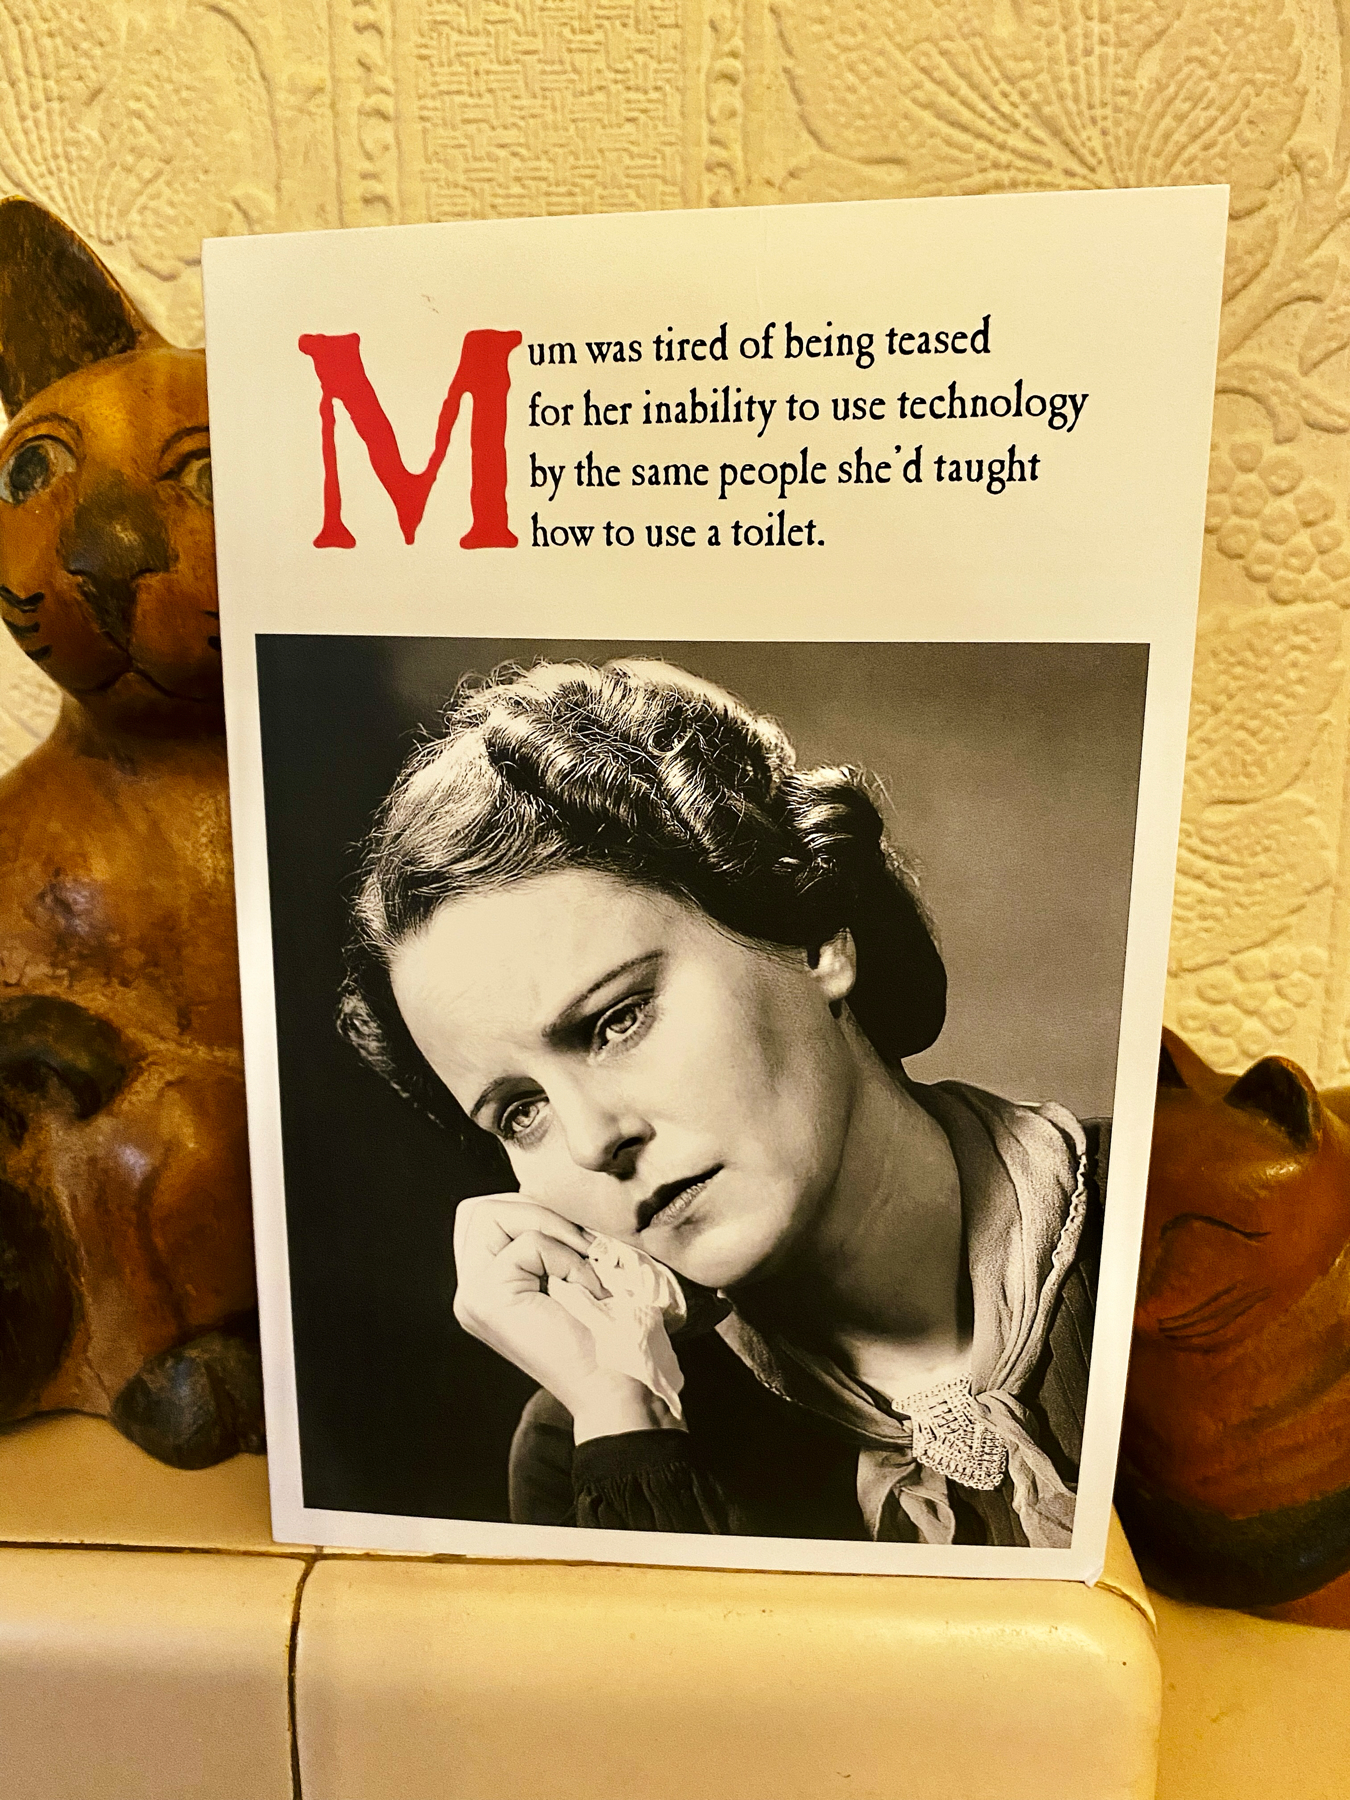 Greeting card featuring a photo of woman resting her chin on her hand, with text that reads: Mum was tired of being teased for her inability to use technology by the same people she'd taught how to use a toilet